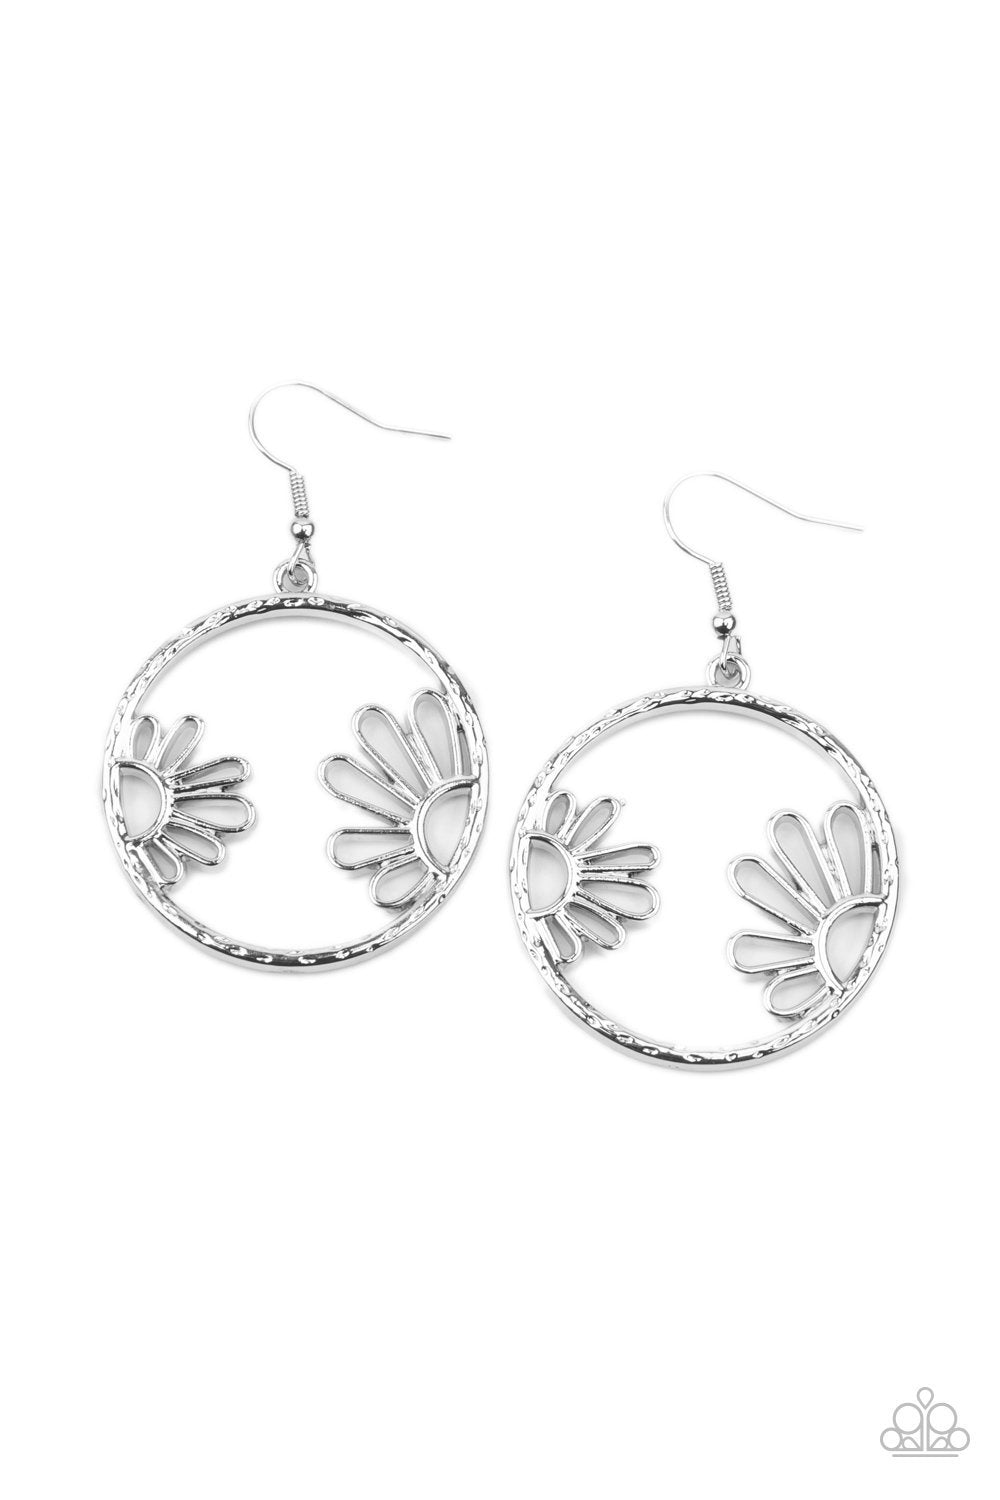 Demurely Daisy Silver Flower Earrings - Paparazzi Accessories- lightbox - CarasShop.com - $5 Jewelry by Cara Jewels